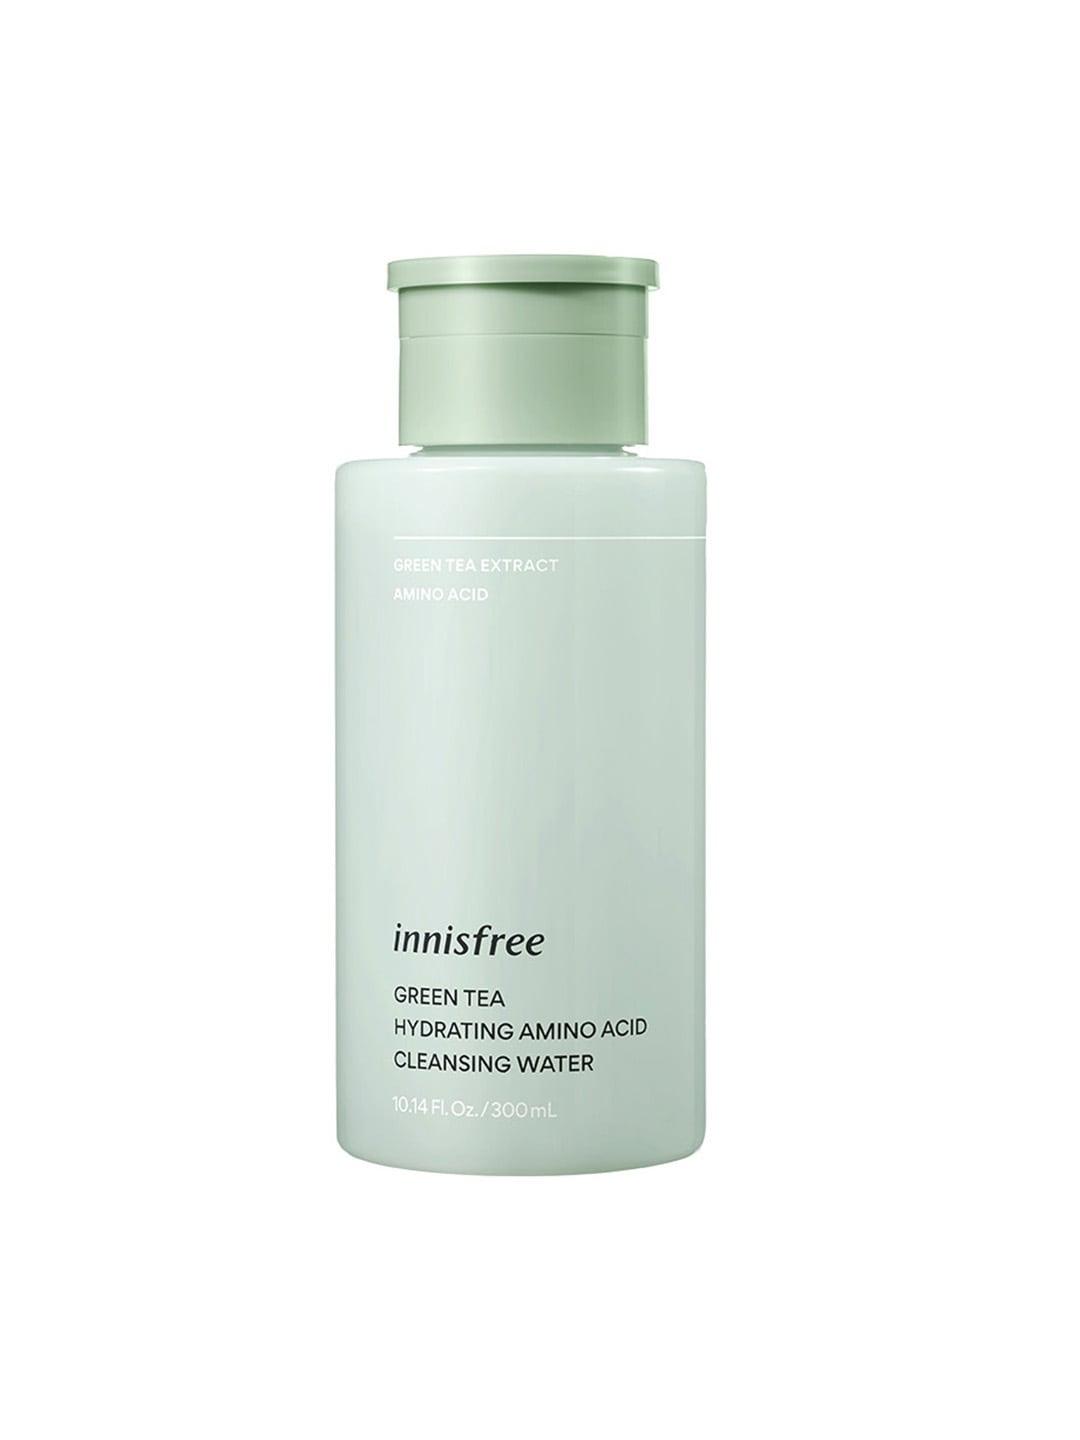 Innisfree Green Tea Hydrating Amino Acid Face Cleansing Water - 300 ml